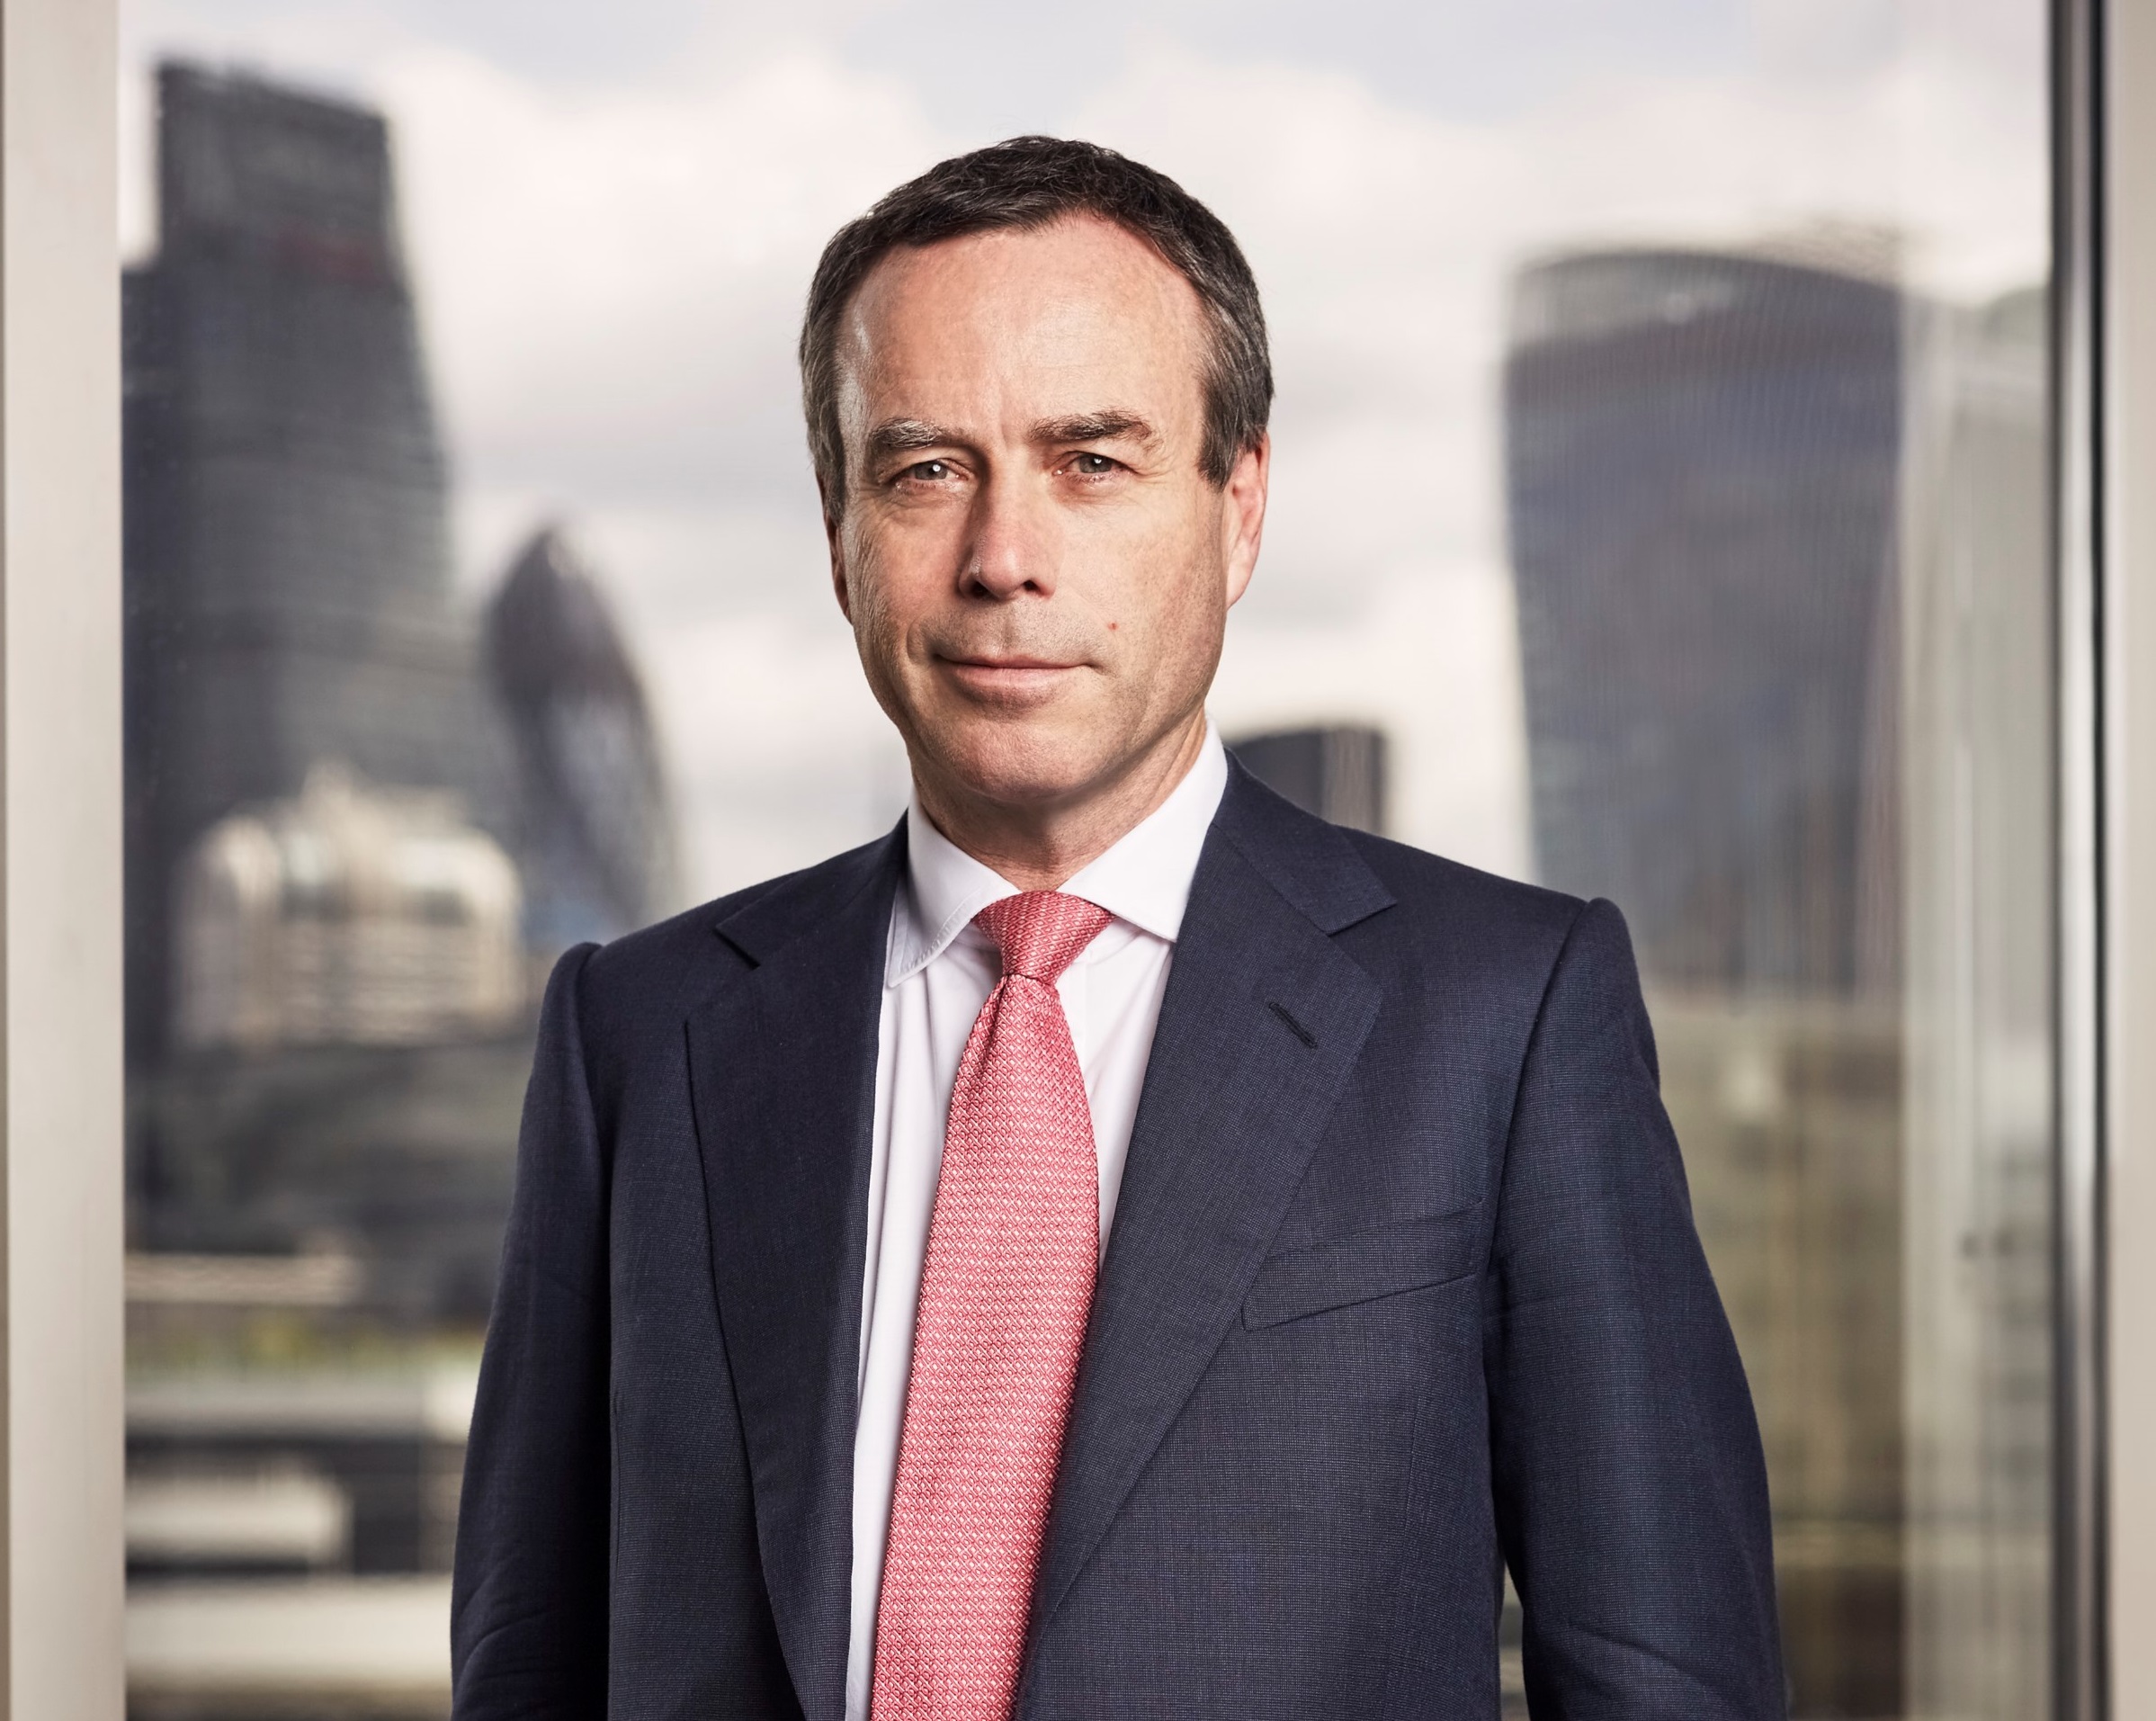 Lionel Barber, Editor of the Financial Times, to speak at The Printing Charity’s Annual Luncheon